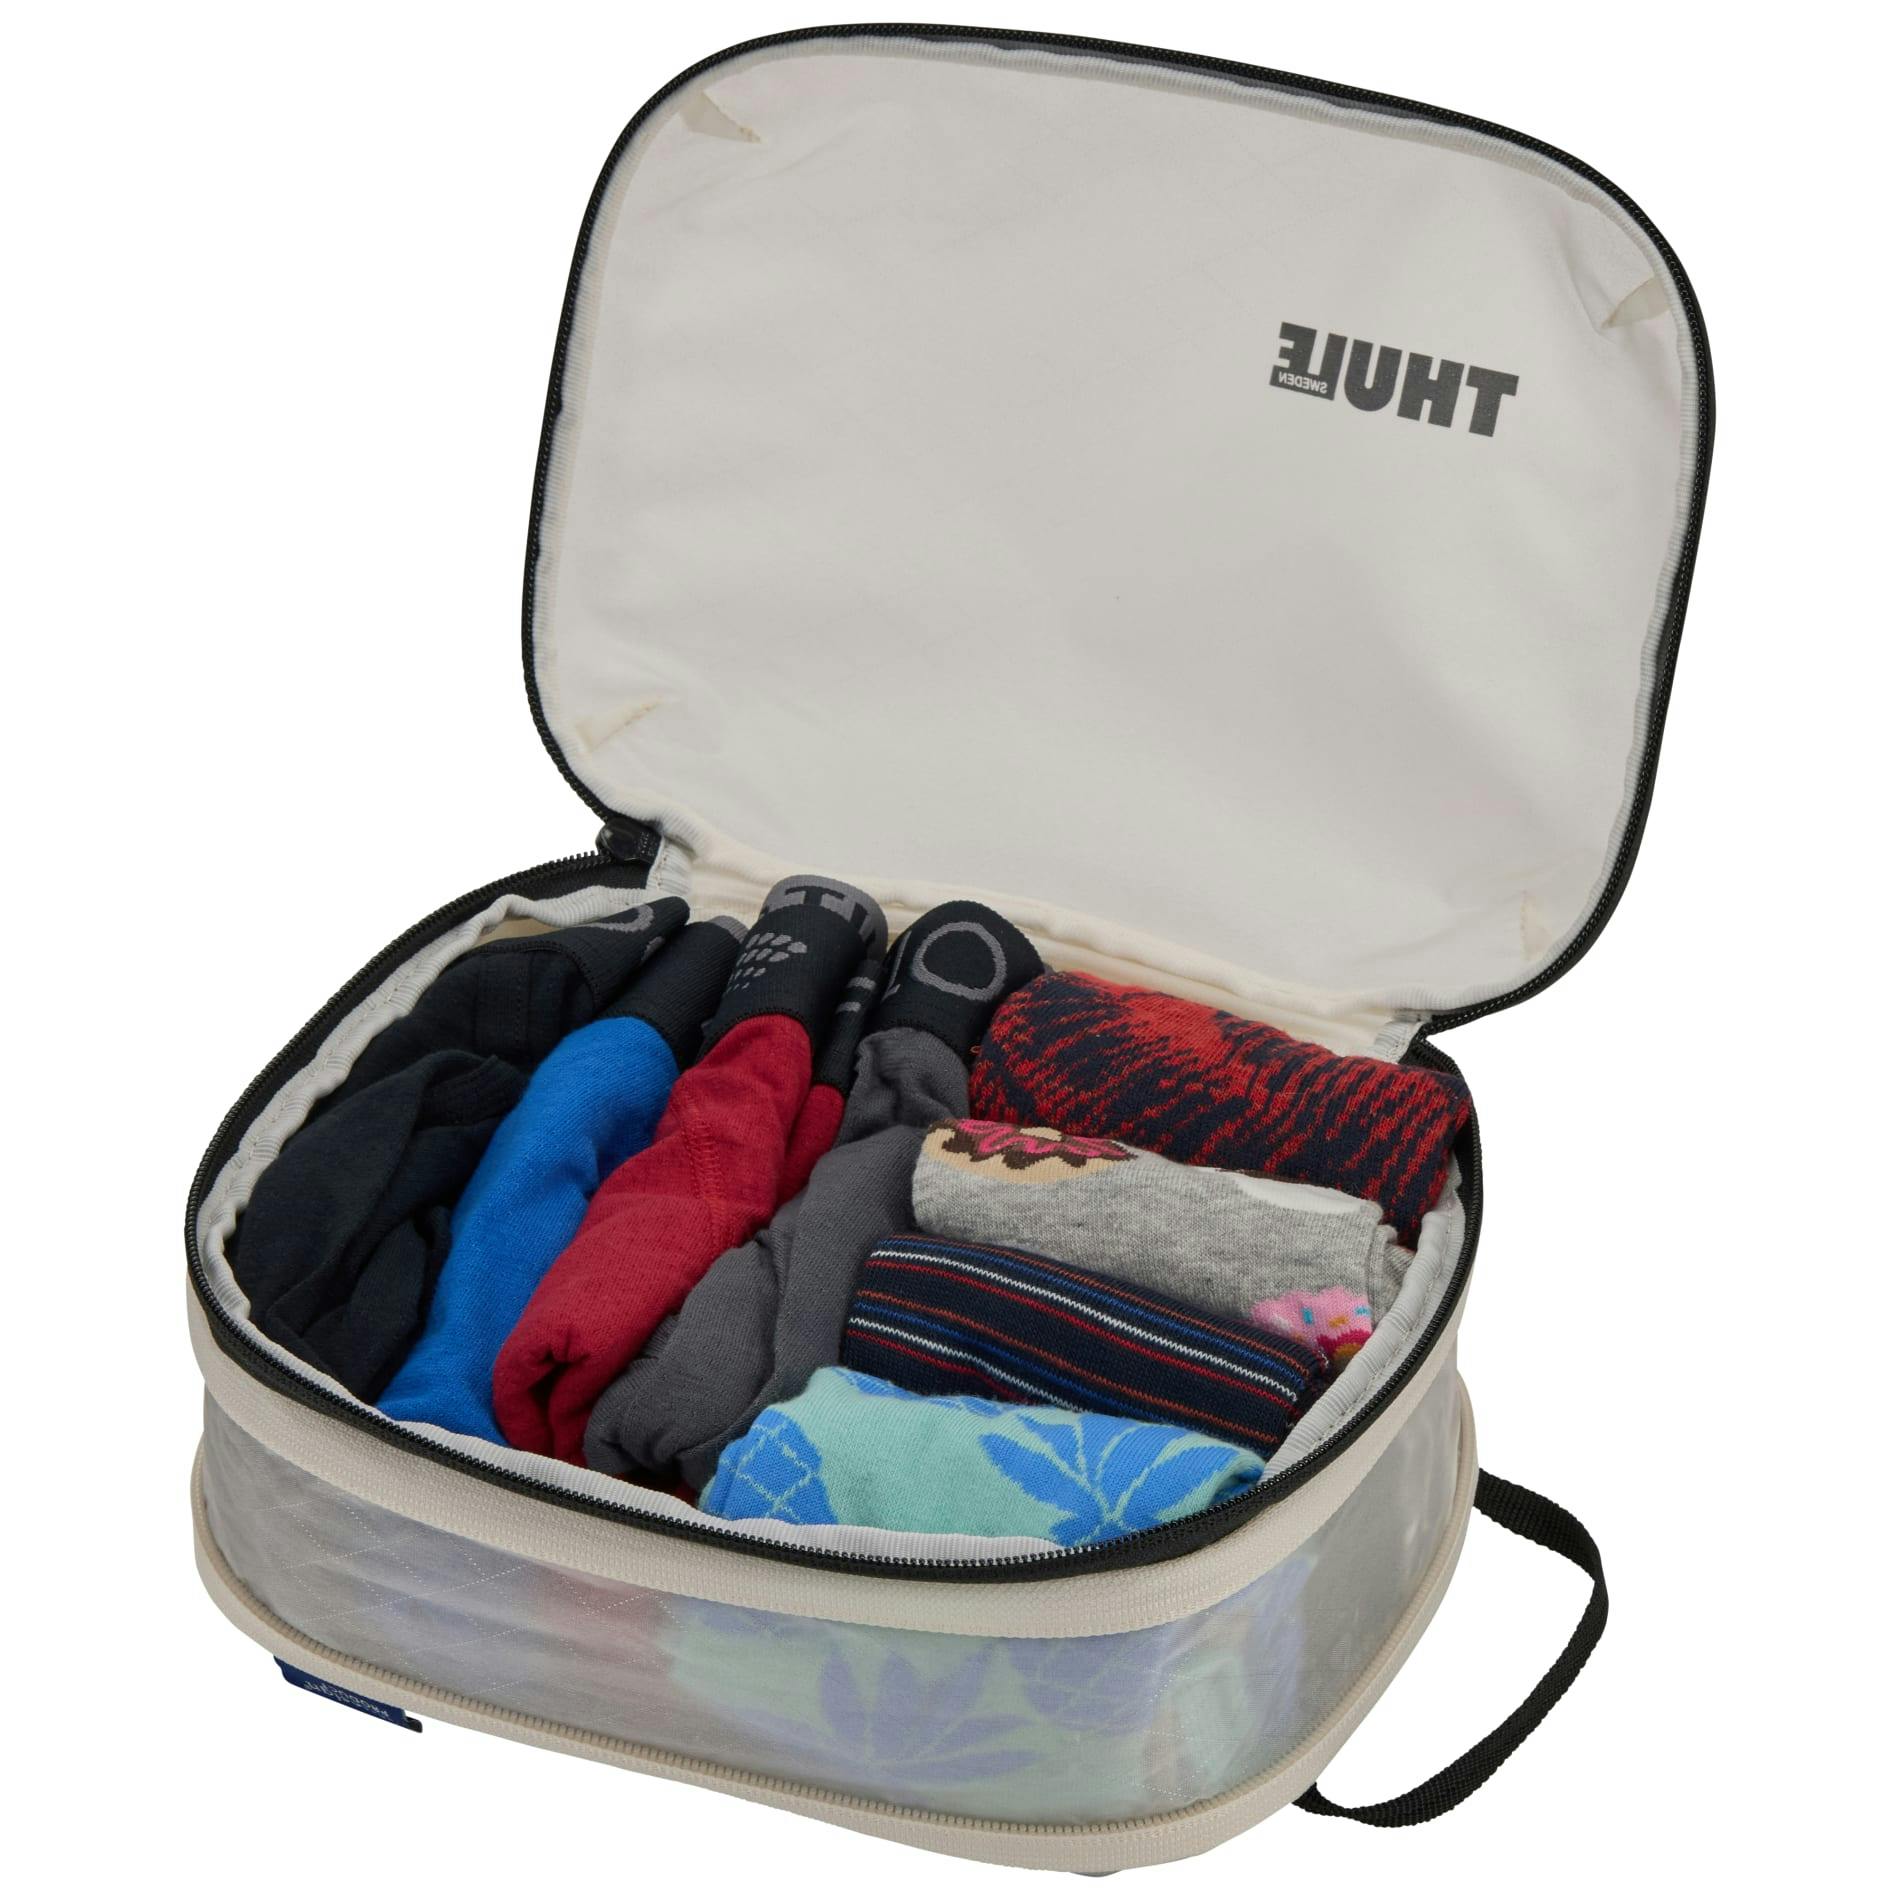 Thule Packing Cube Set - additional Image 1